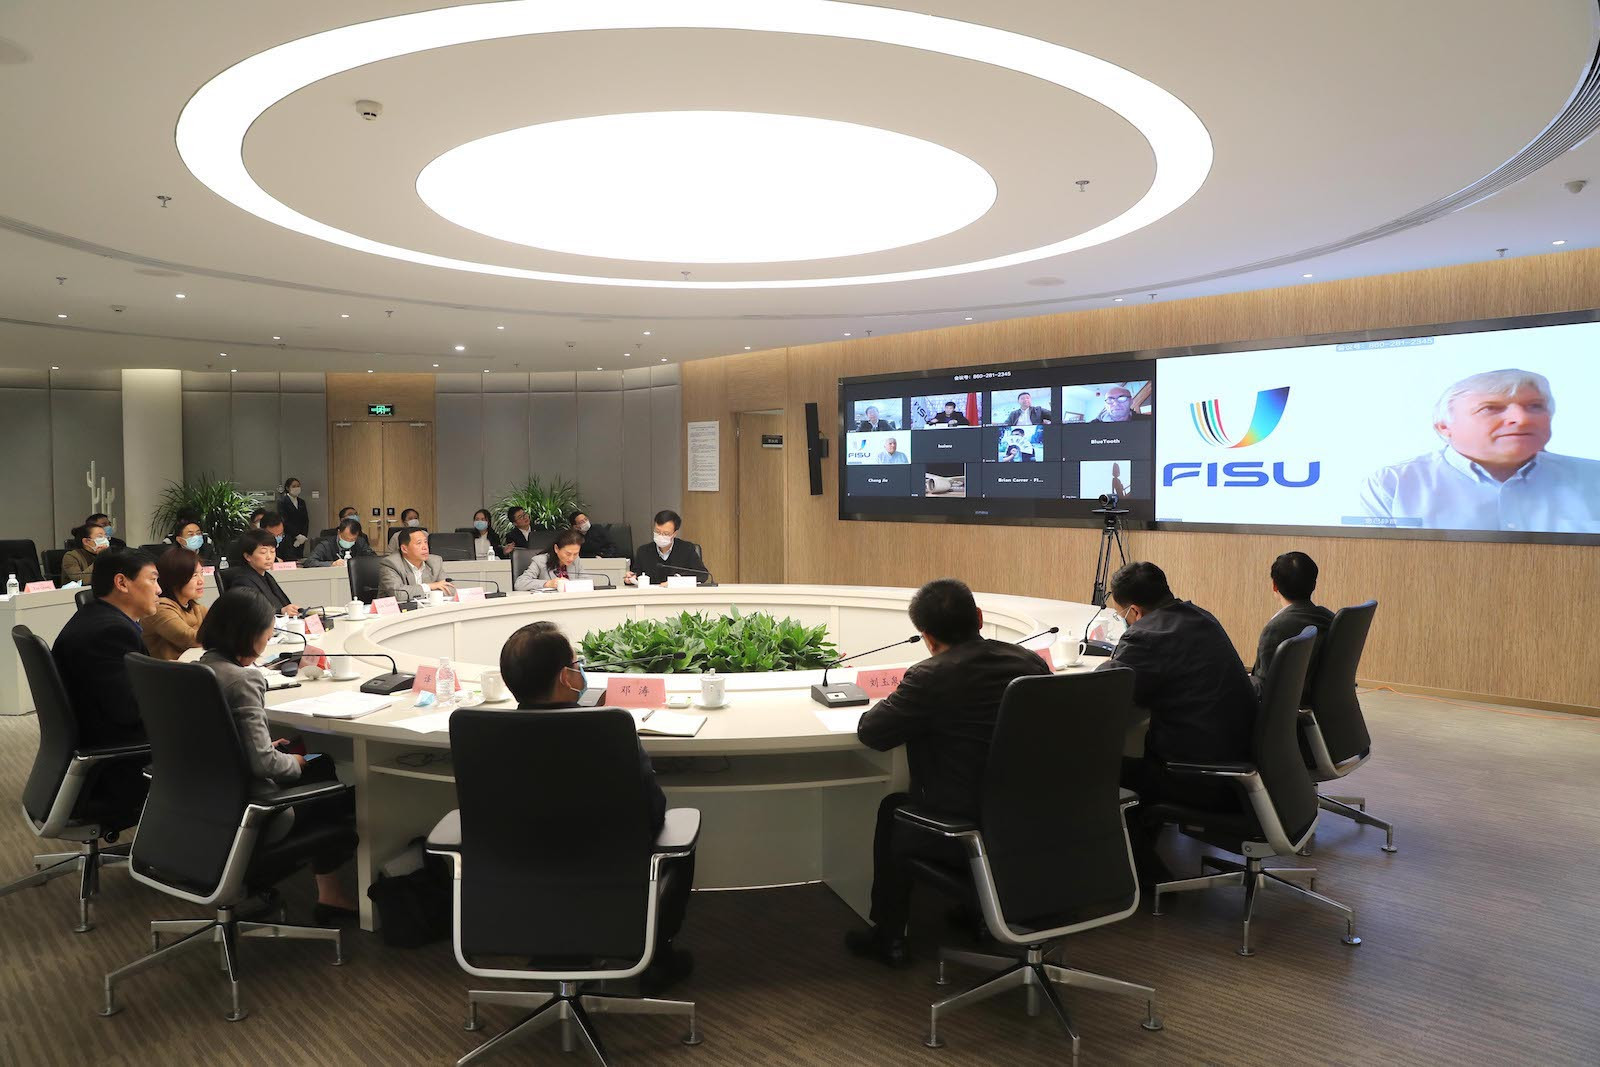 Chengdu 2021 provide update to FISU on video conference meeting